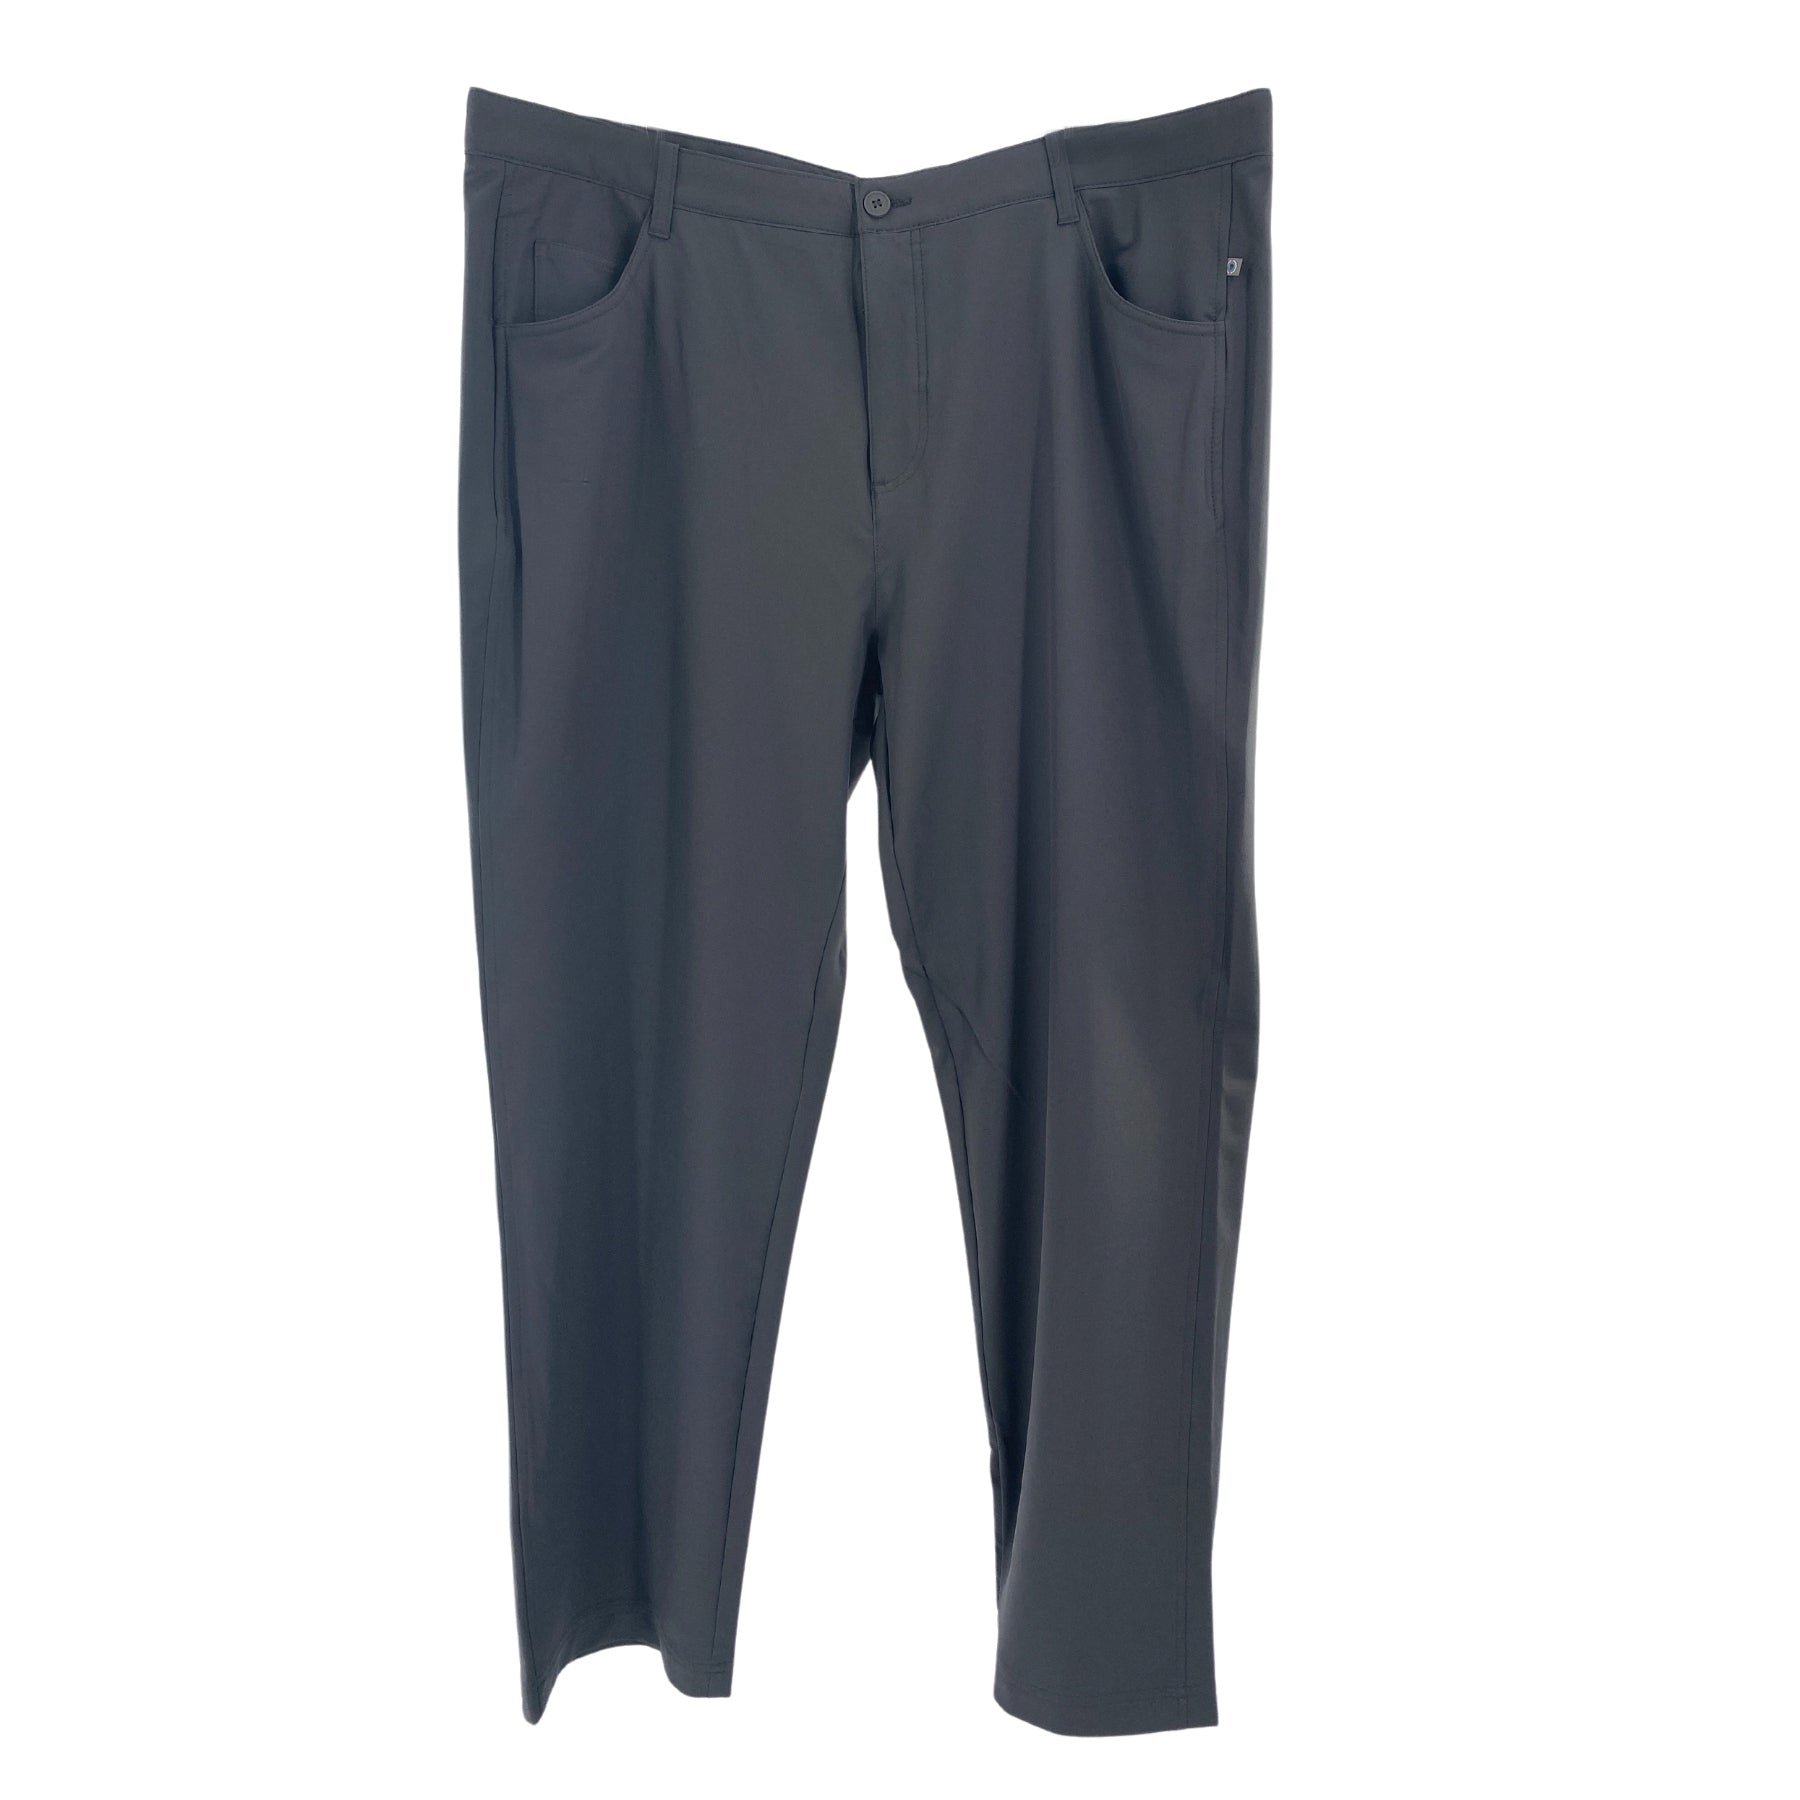 Ping Men's Players Golf Trousers in Asphalt Grey 40S